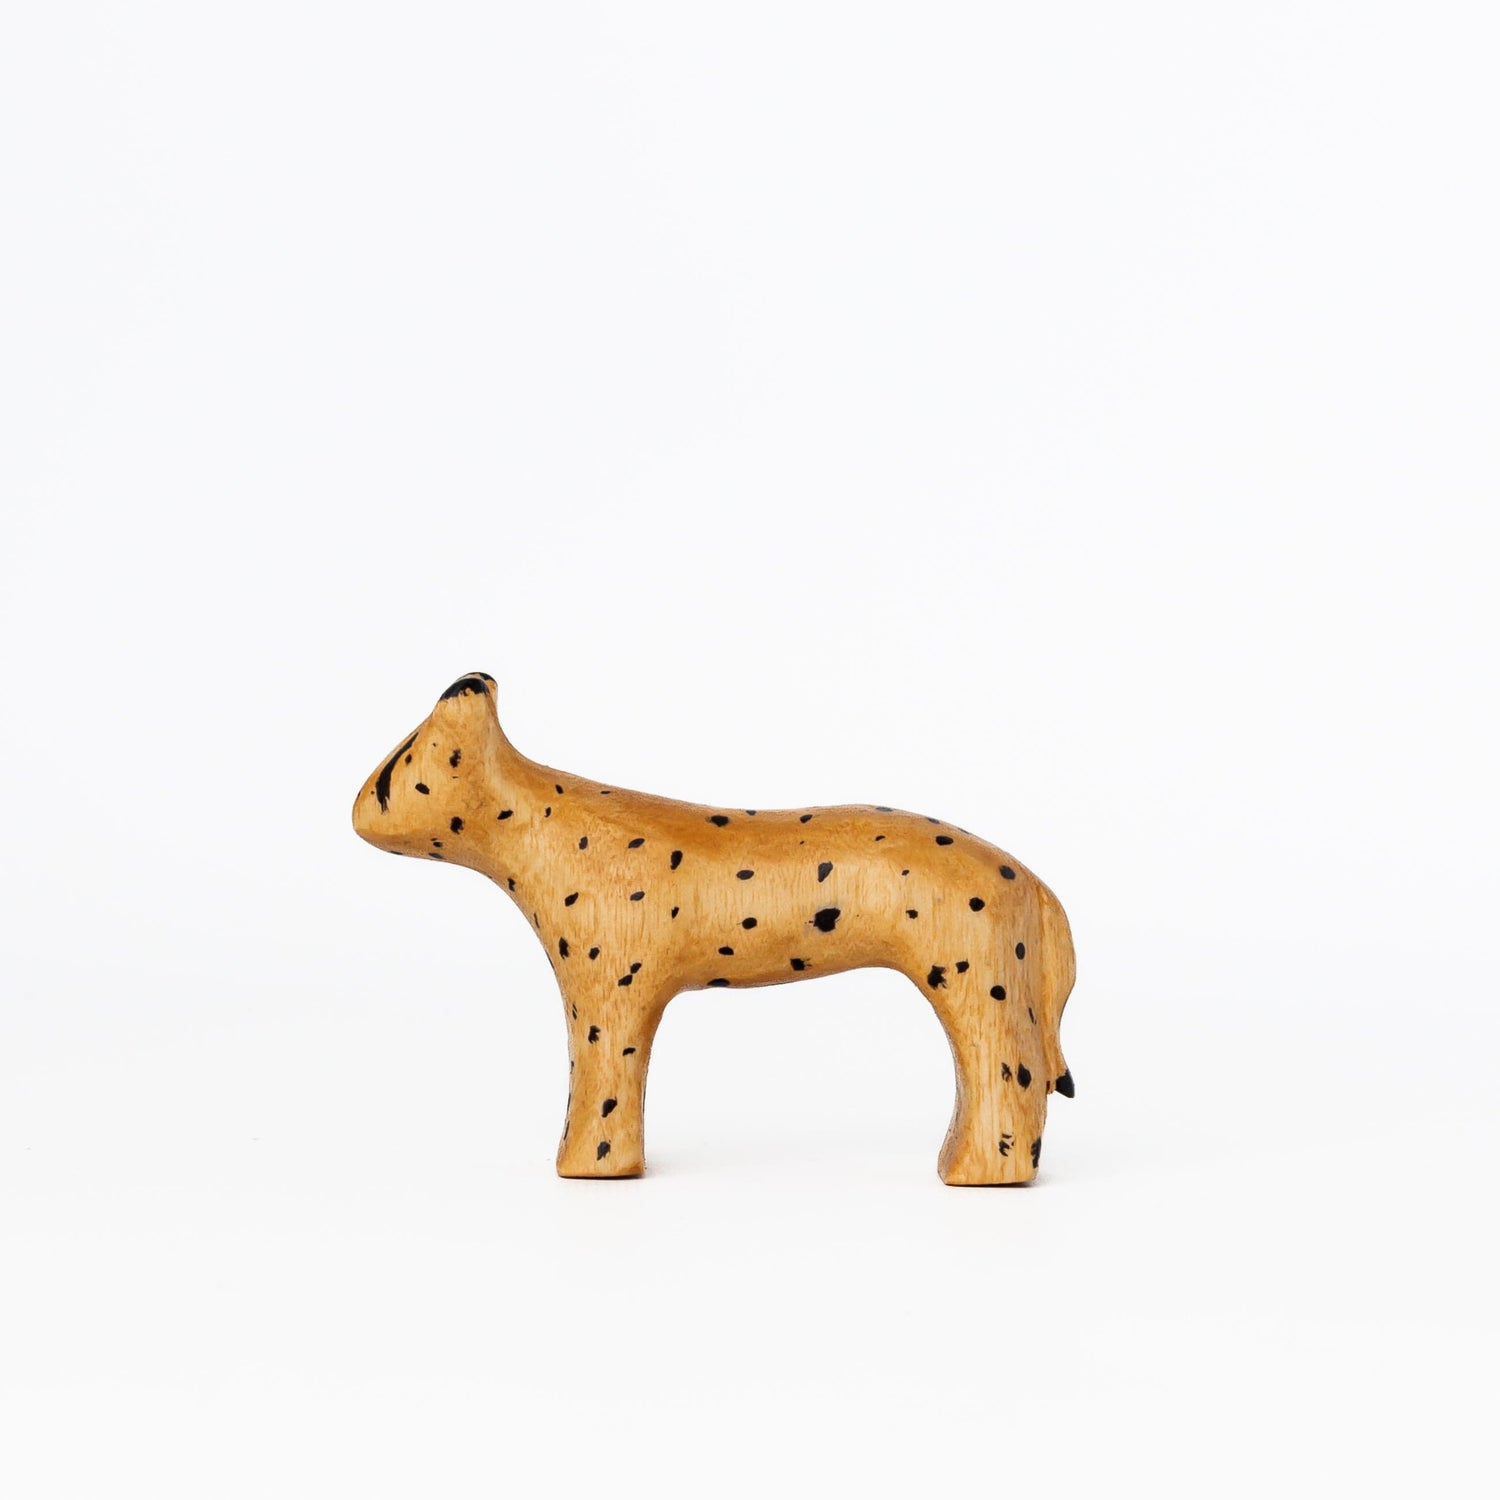 Bumbleberry Toys Wooden Animals "Charlie Cheetah" Wooden Animal Toy (Handmade in Canada)